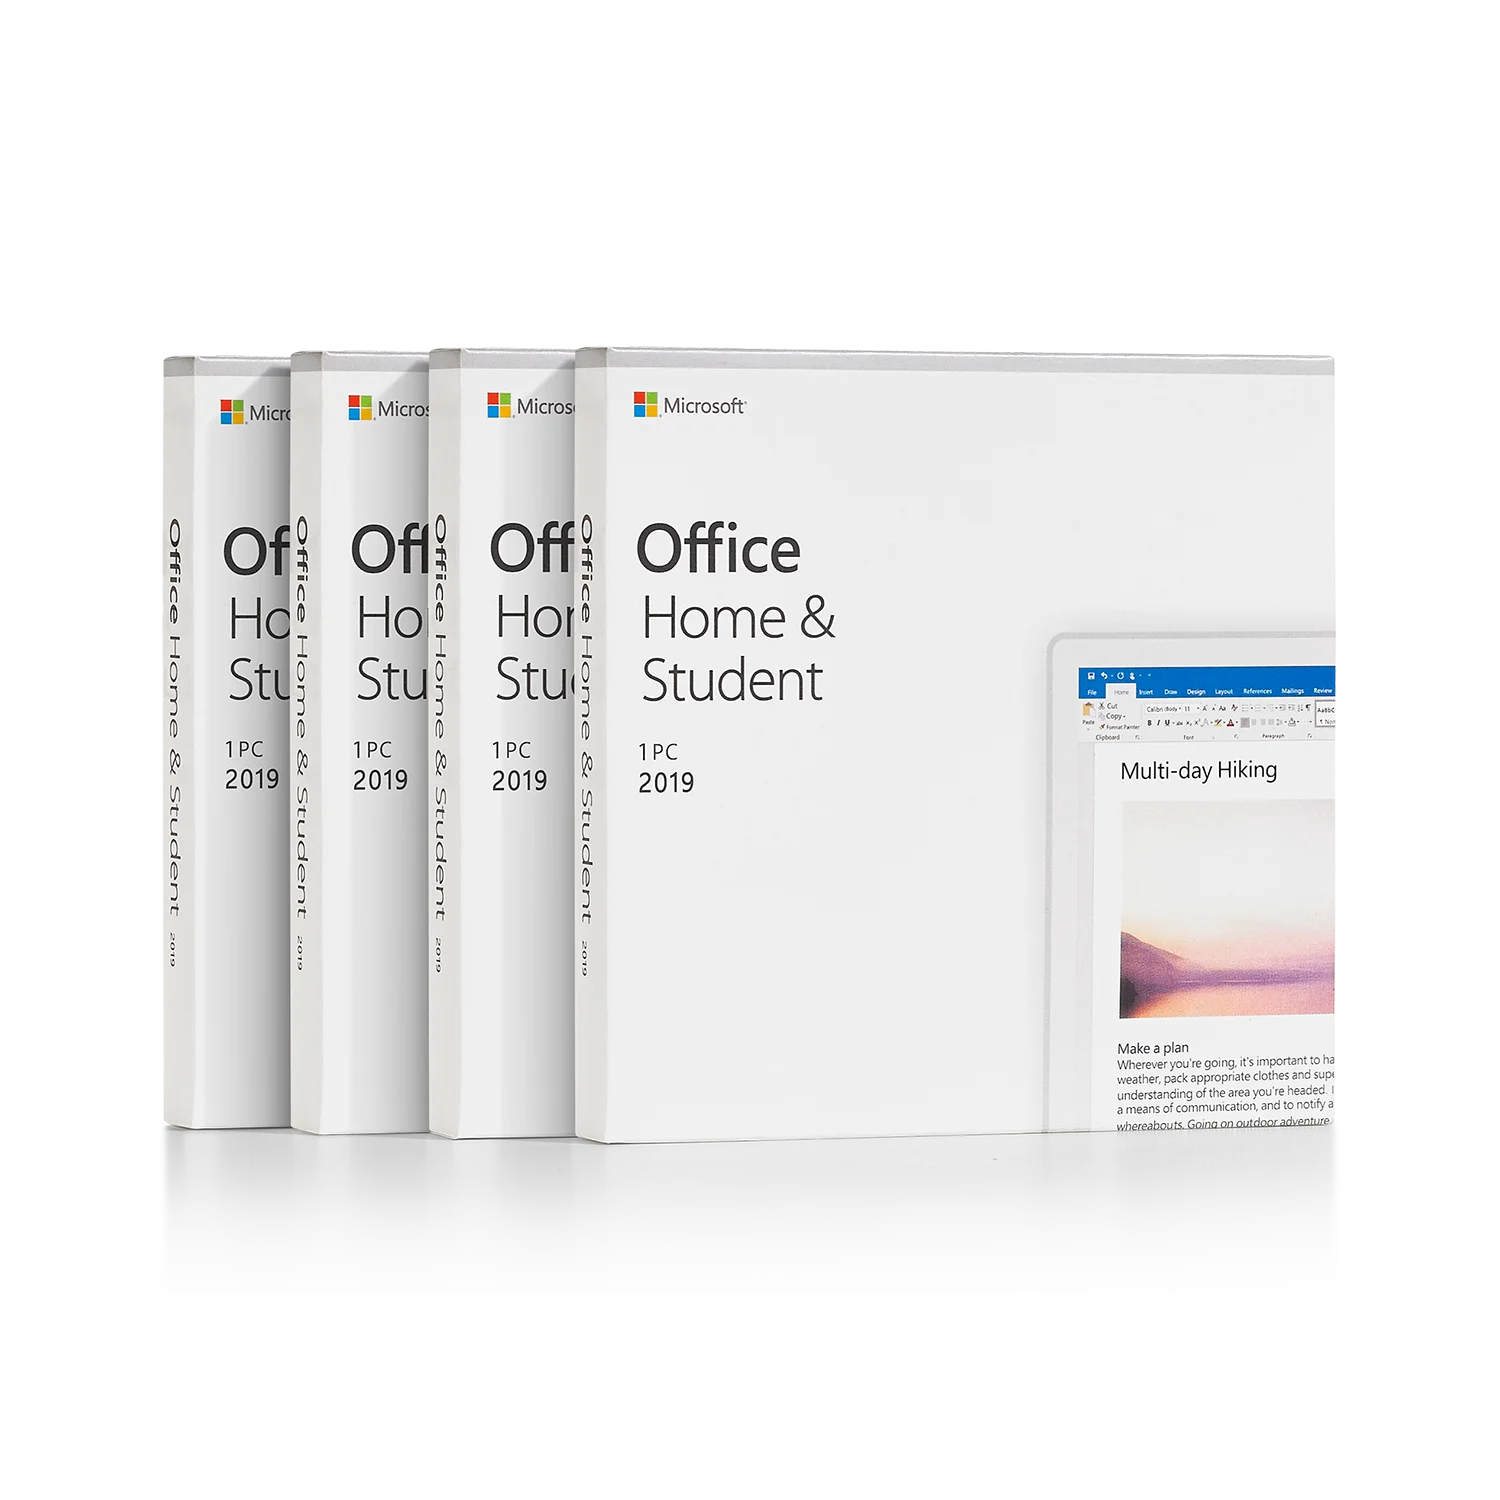 Office Home and Student 2019 for PC key card online download global version office 2019 home and student key card